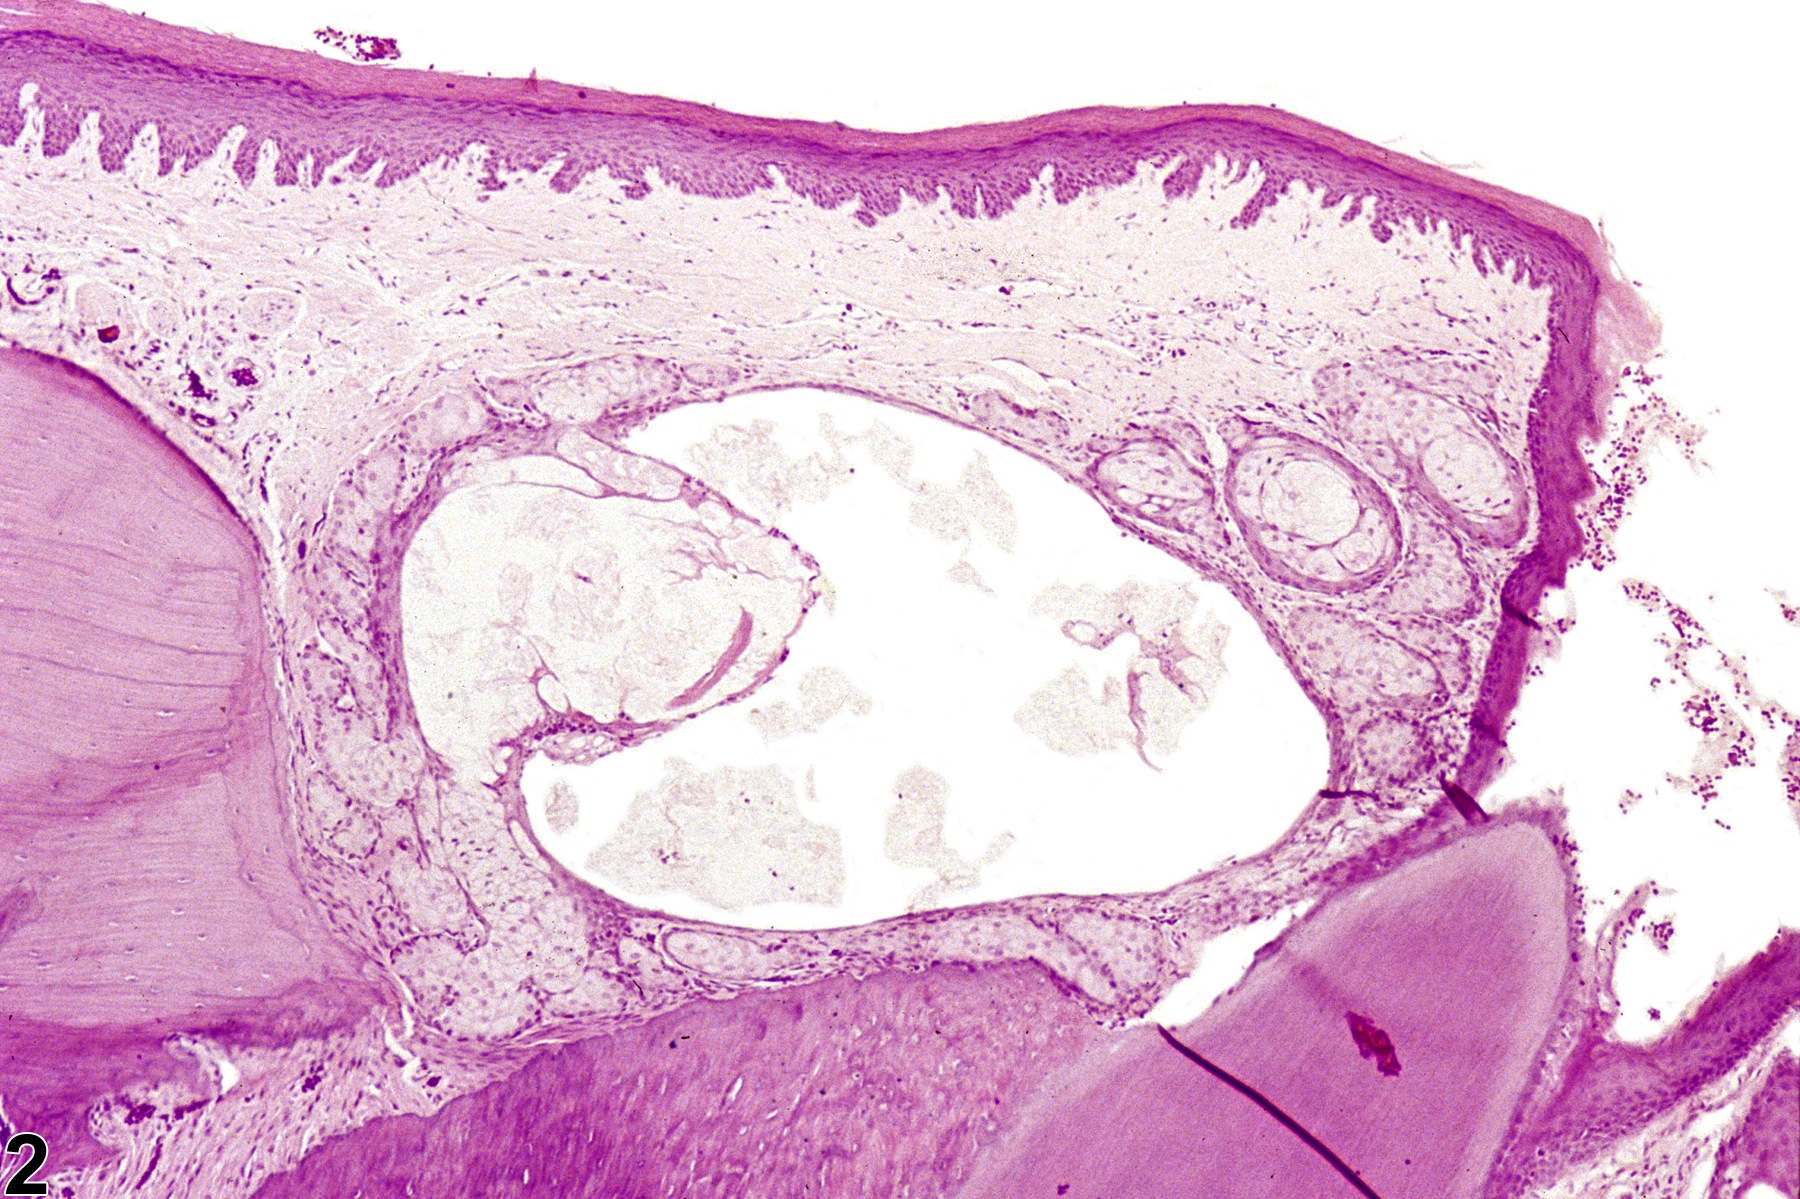 Image of ectopic tissue in the oral mucosa gingiva from a male F344/N rat in a chronic study